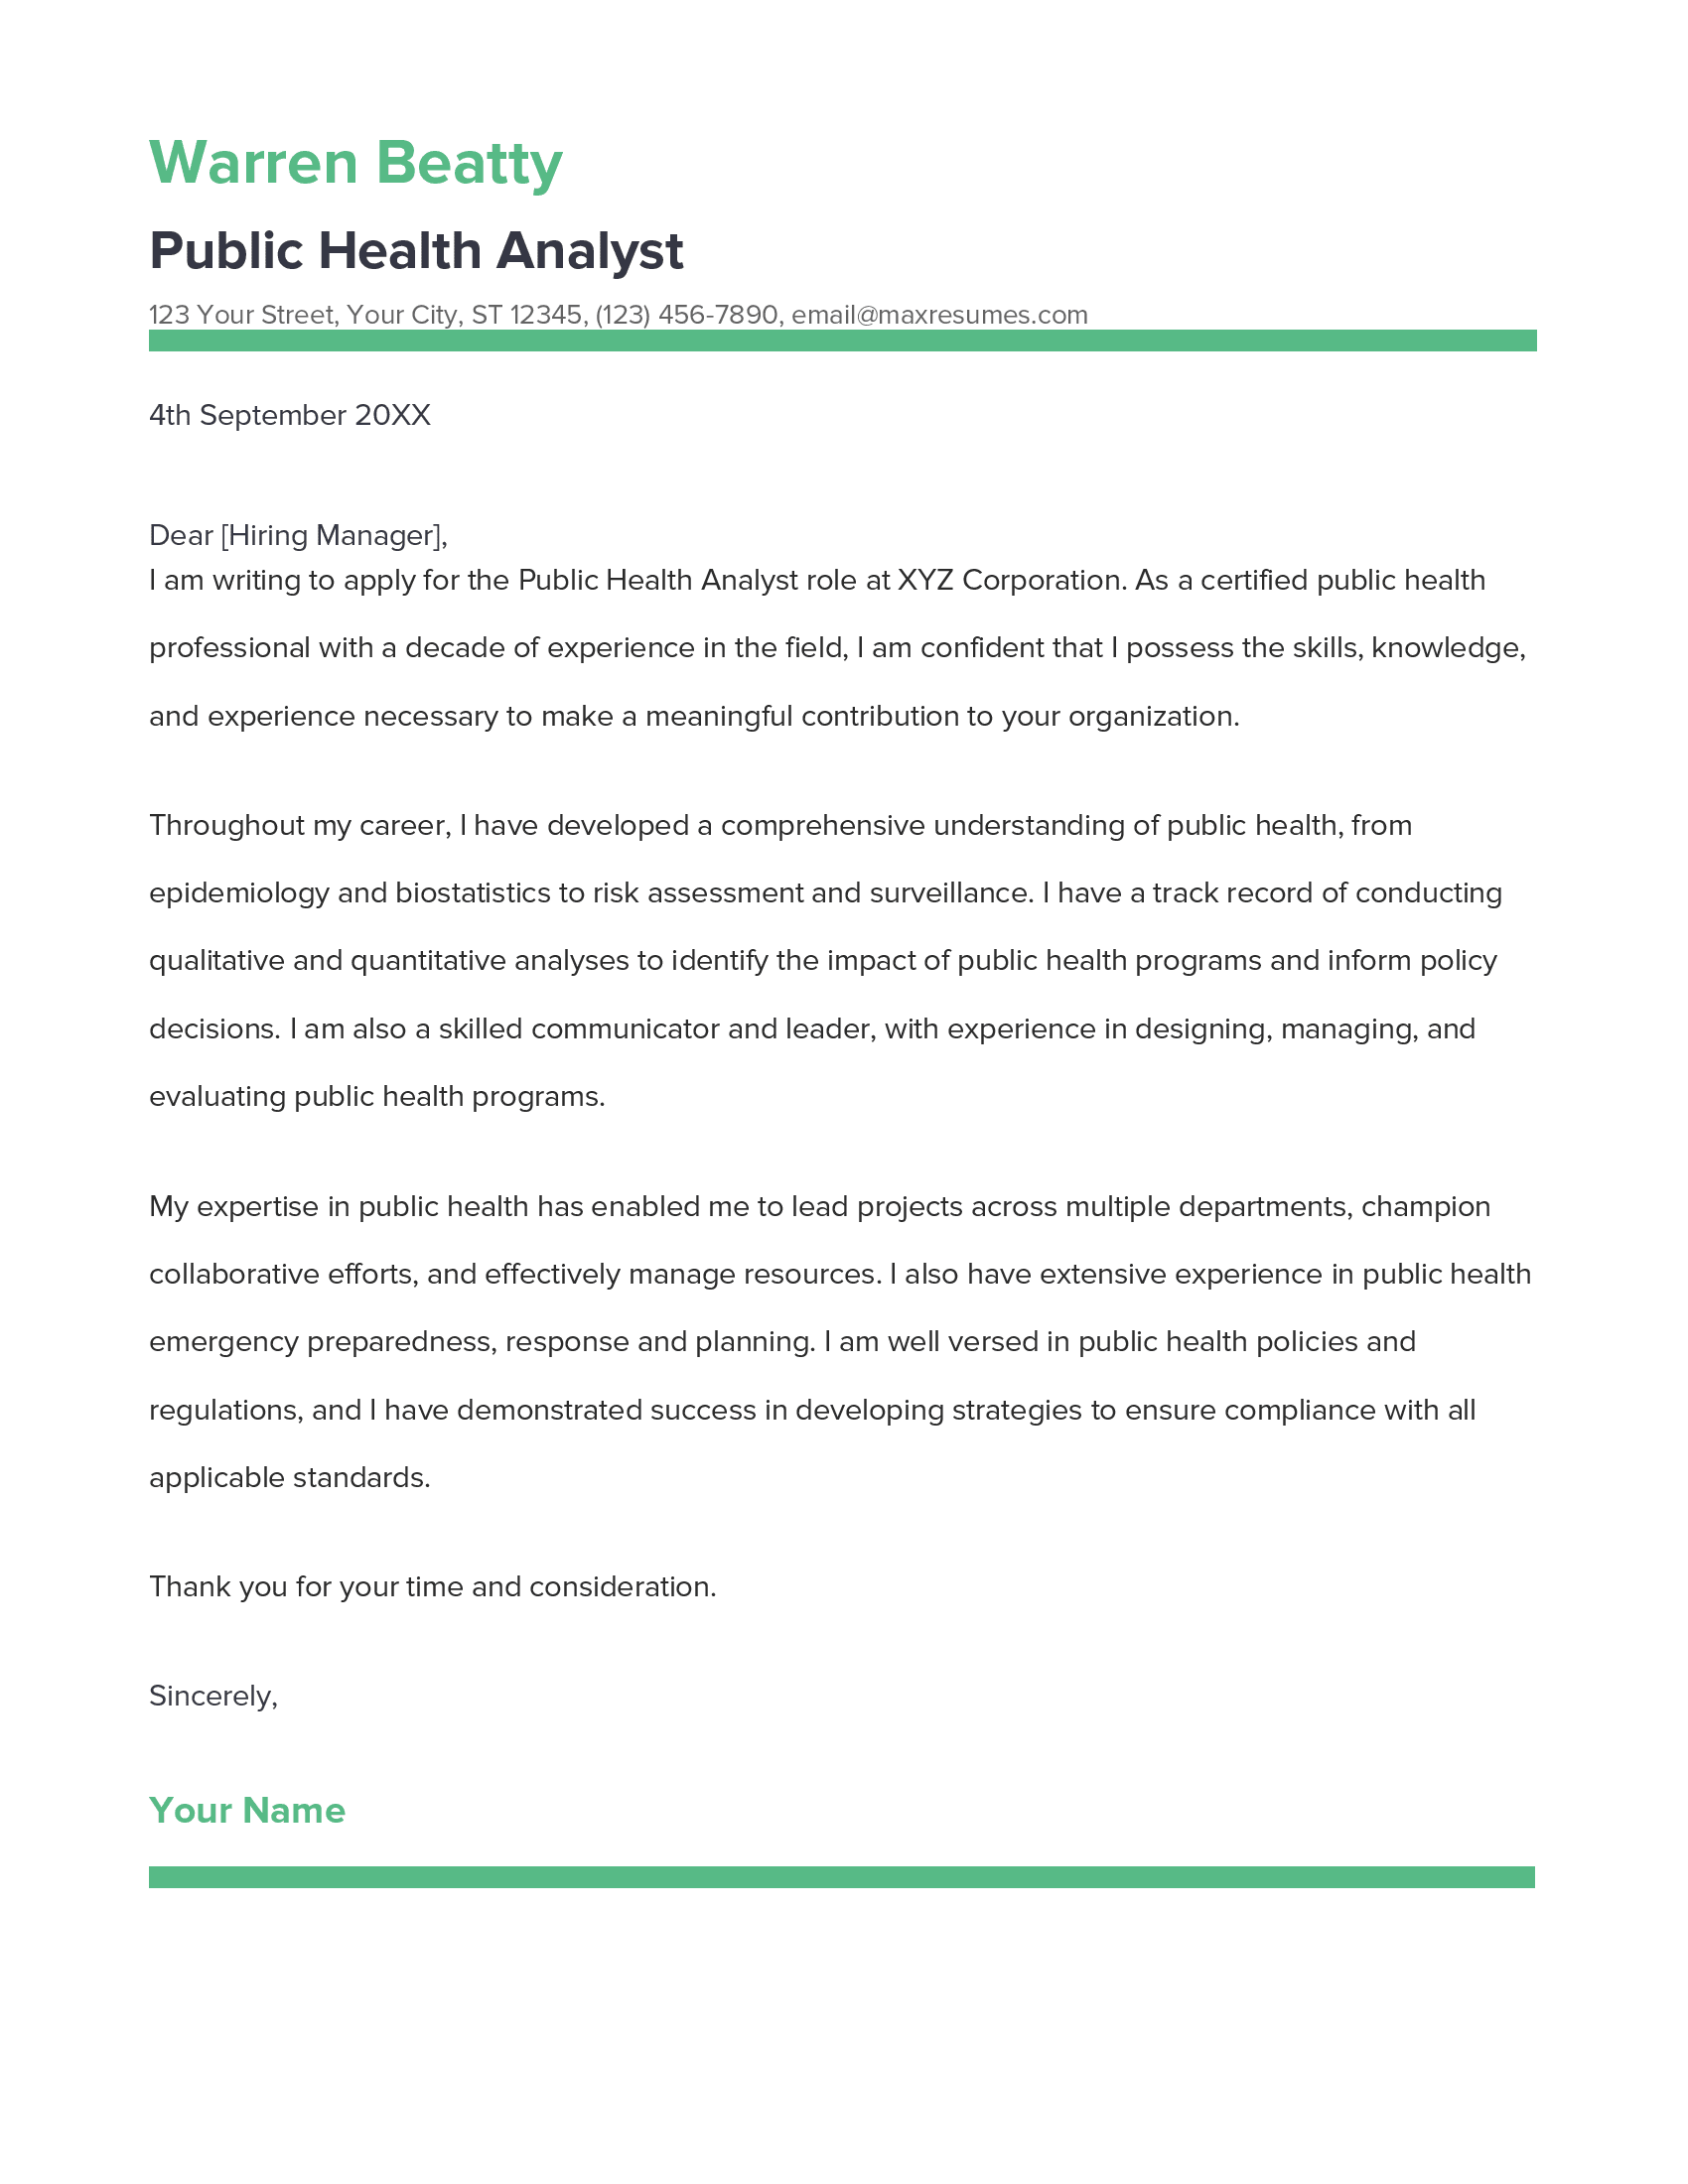 Public Health Analyst Cover Letter Example